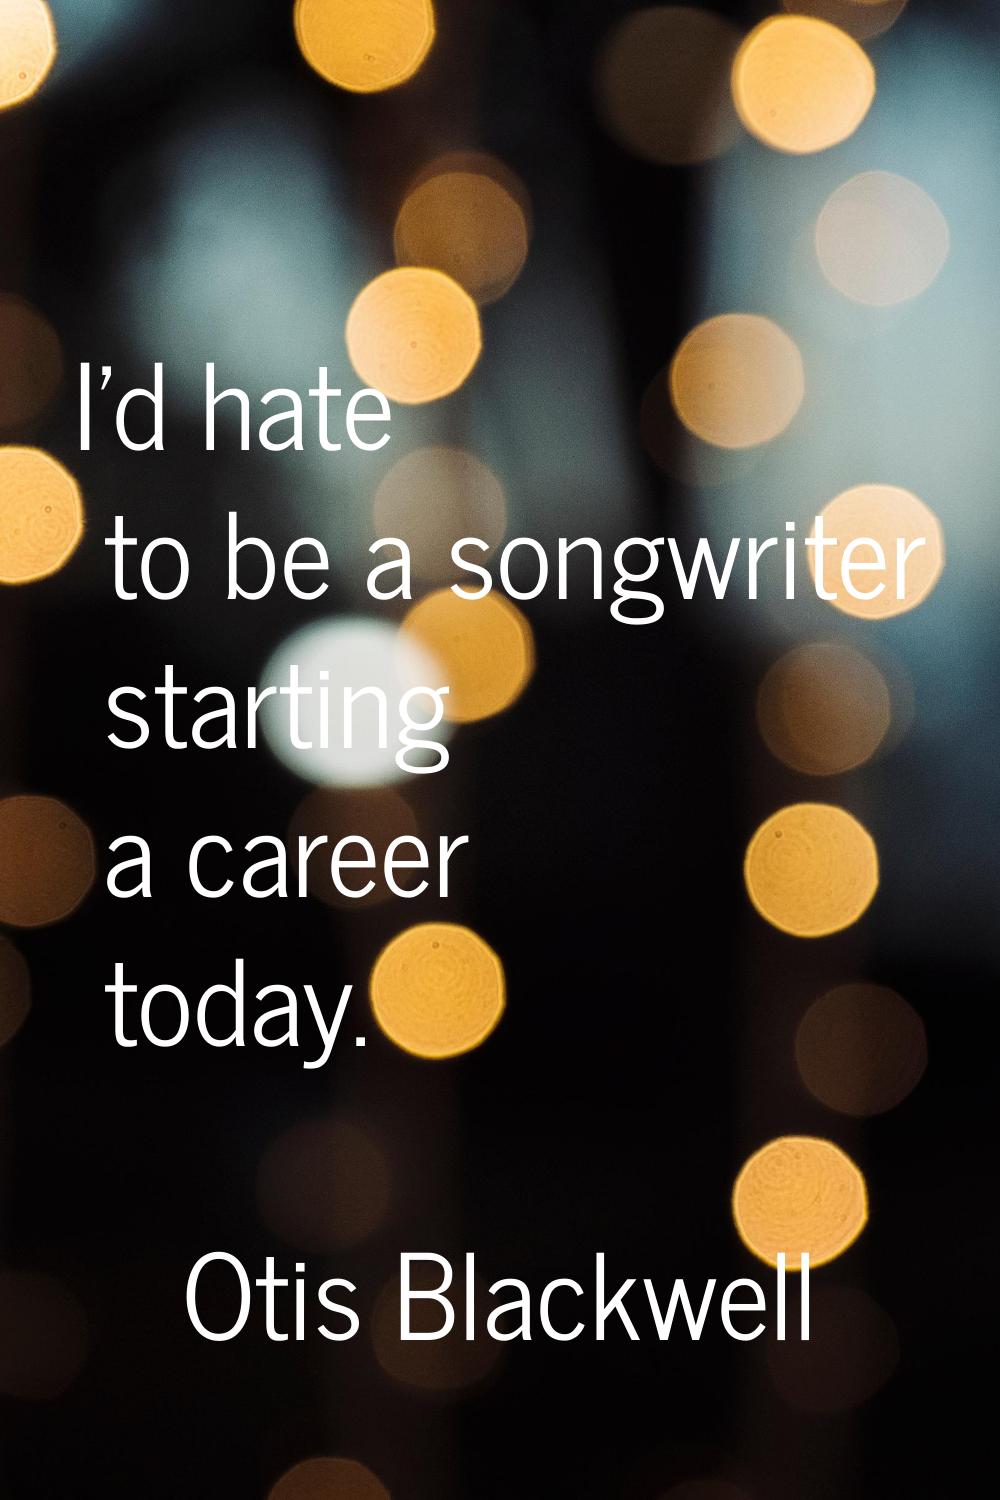 I'd hate to be a songwriter starting a career today.